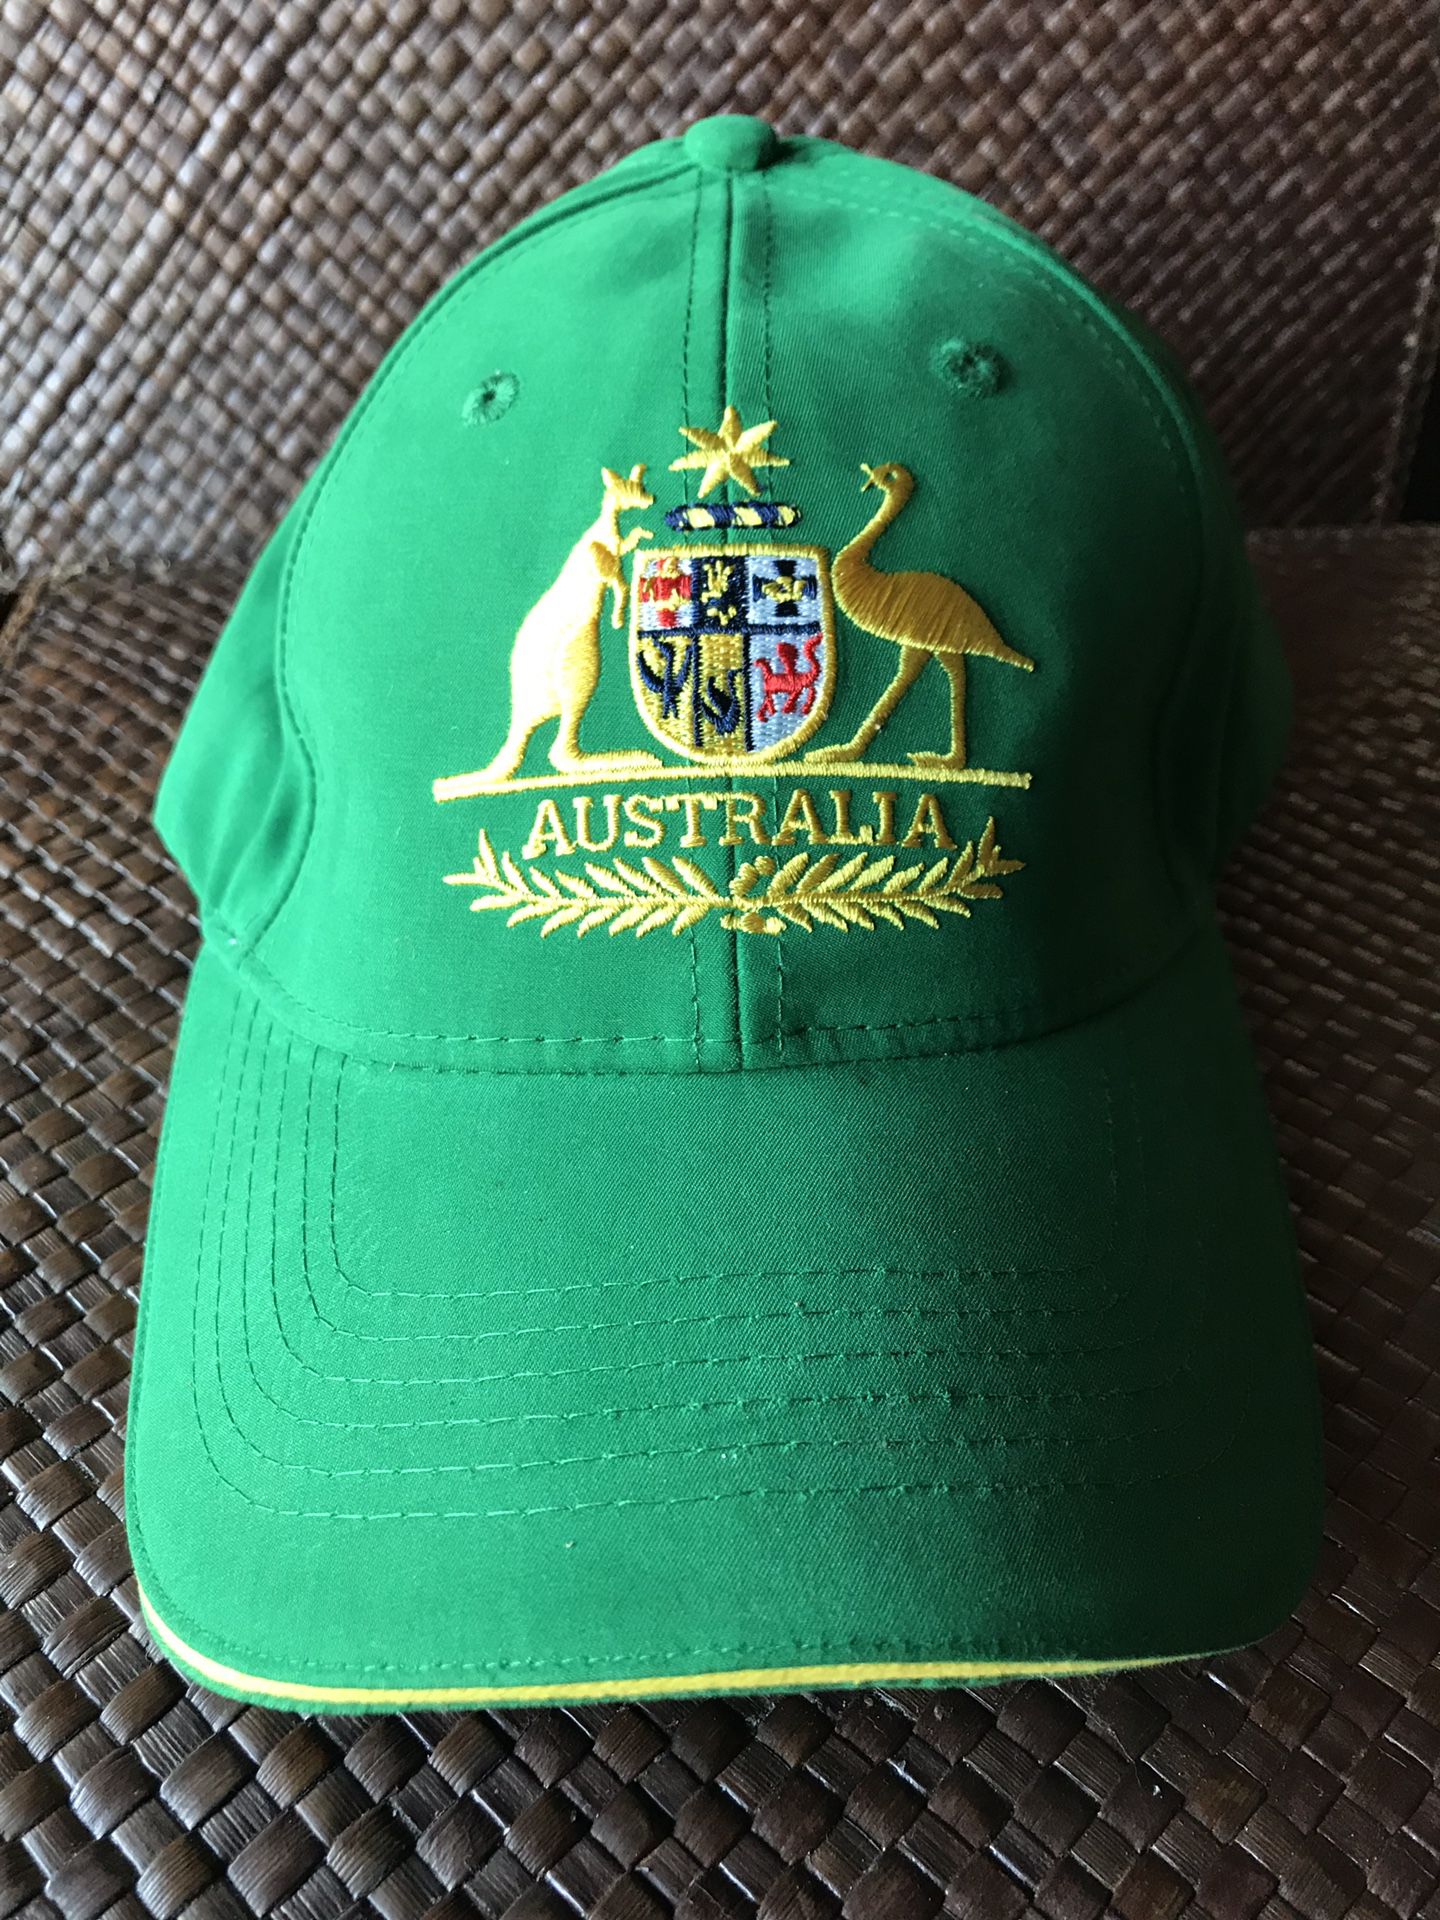 Brand new Australia baseball cap, tags and bag included